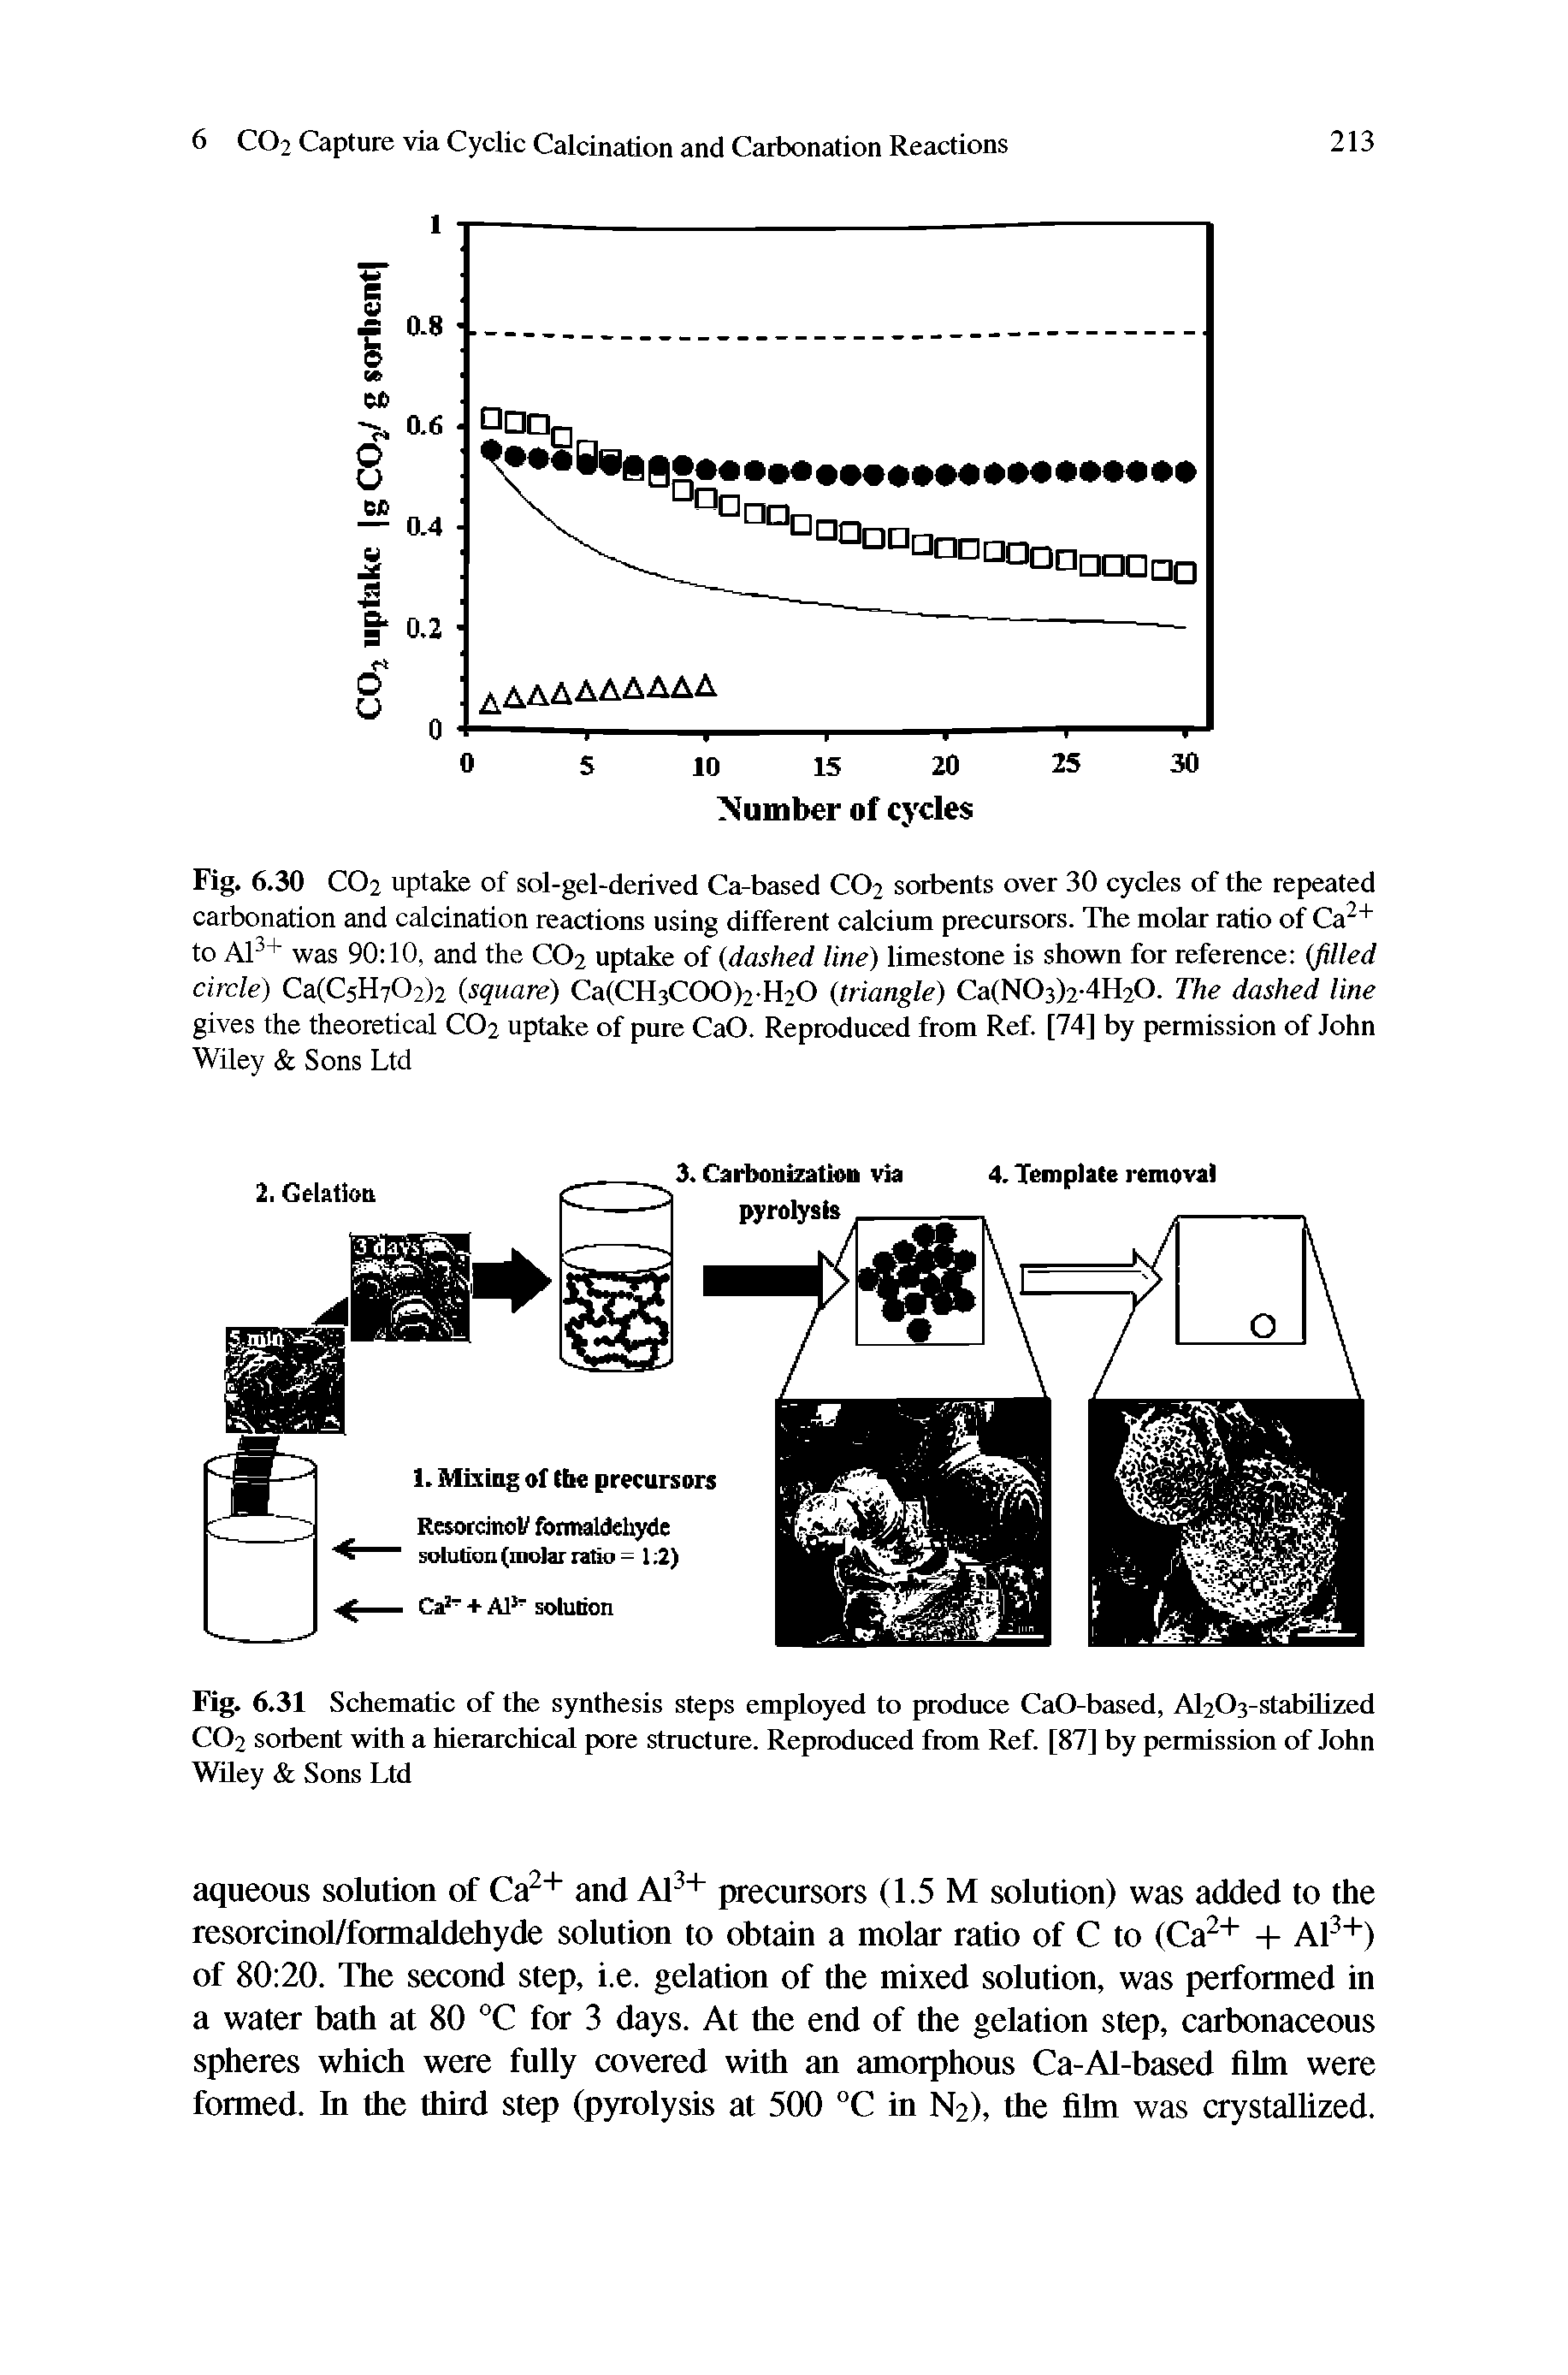 Fig. 6.31 Schematic of the synthesis steps employed to produce CaO-based, Al203-stabilized CO2 sorbent with a hierarchical pore structure. Reproduced from Ref. [87] by permission of John WUey Sons Ltd...